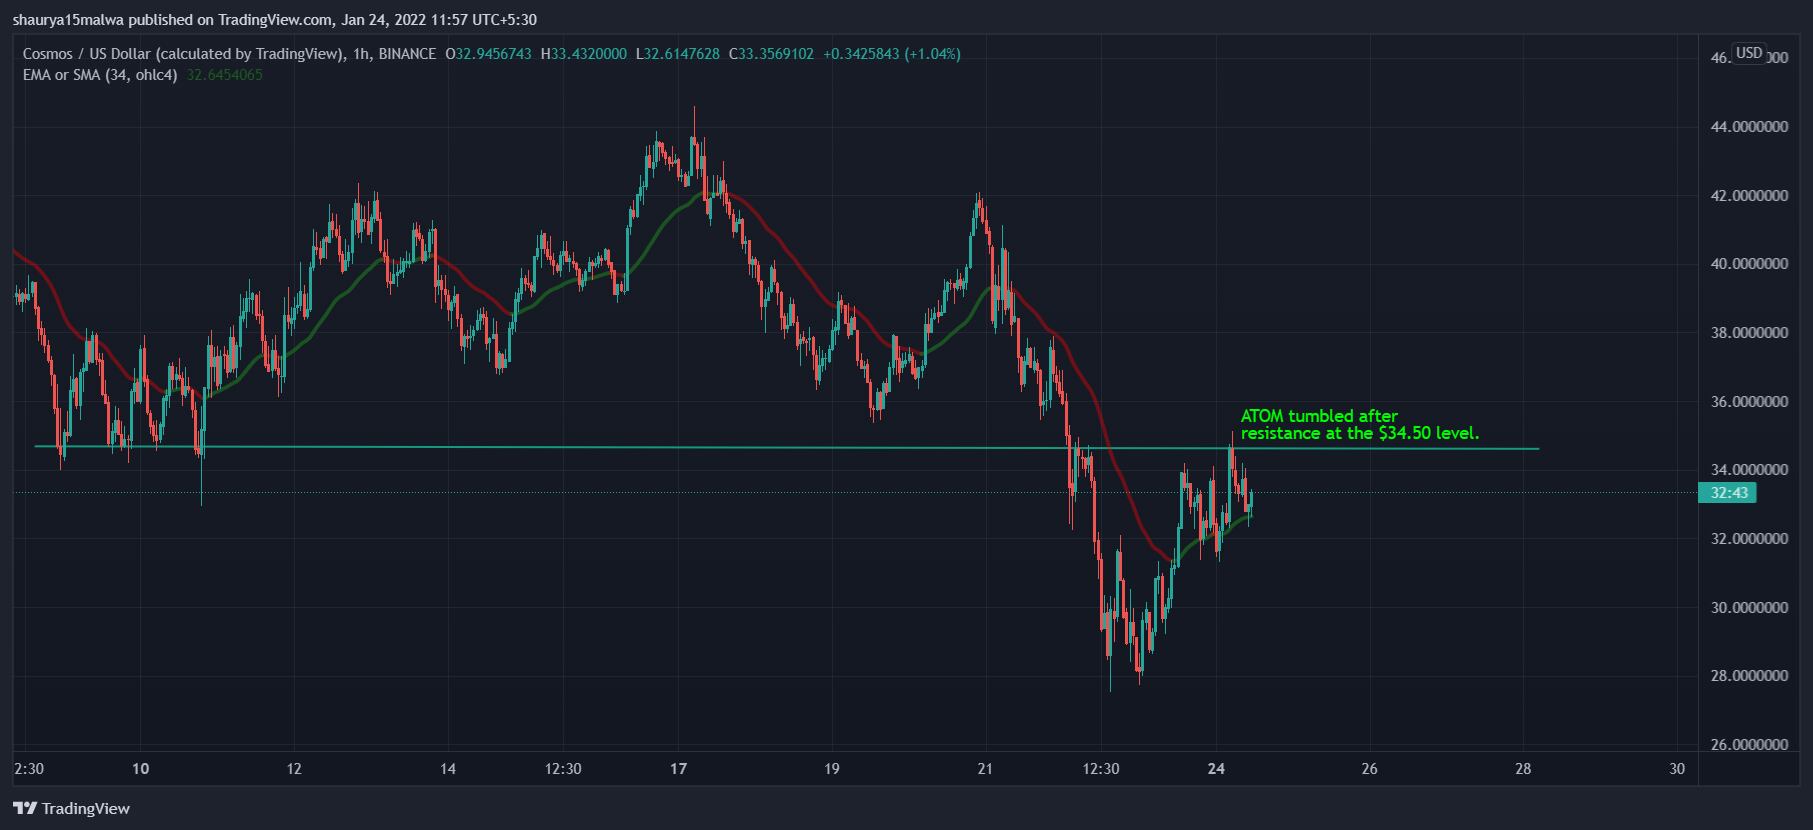 ATOM surged 8% in the past 24 hours but saw resistance on Monday morning. (TradingView)